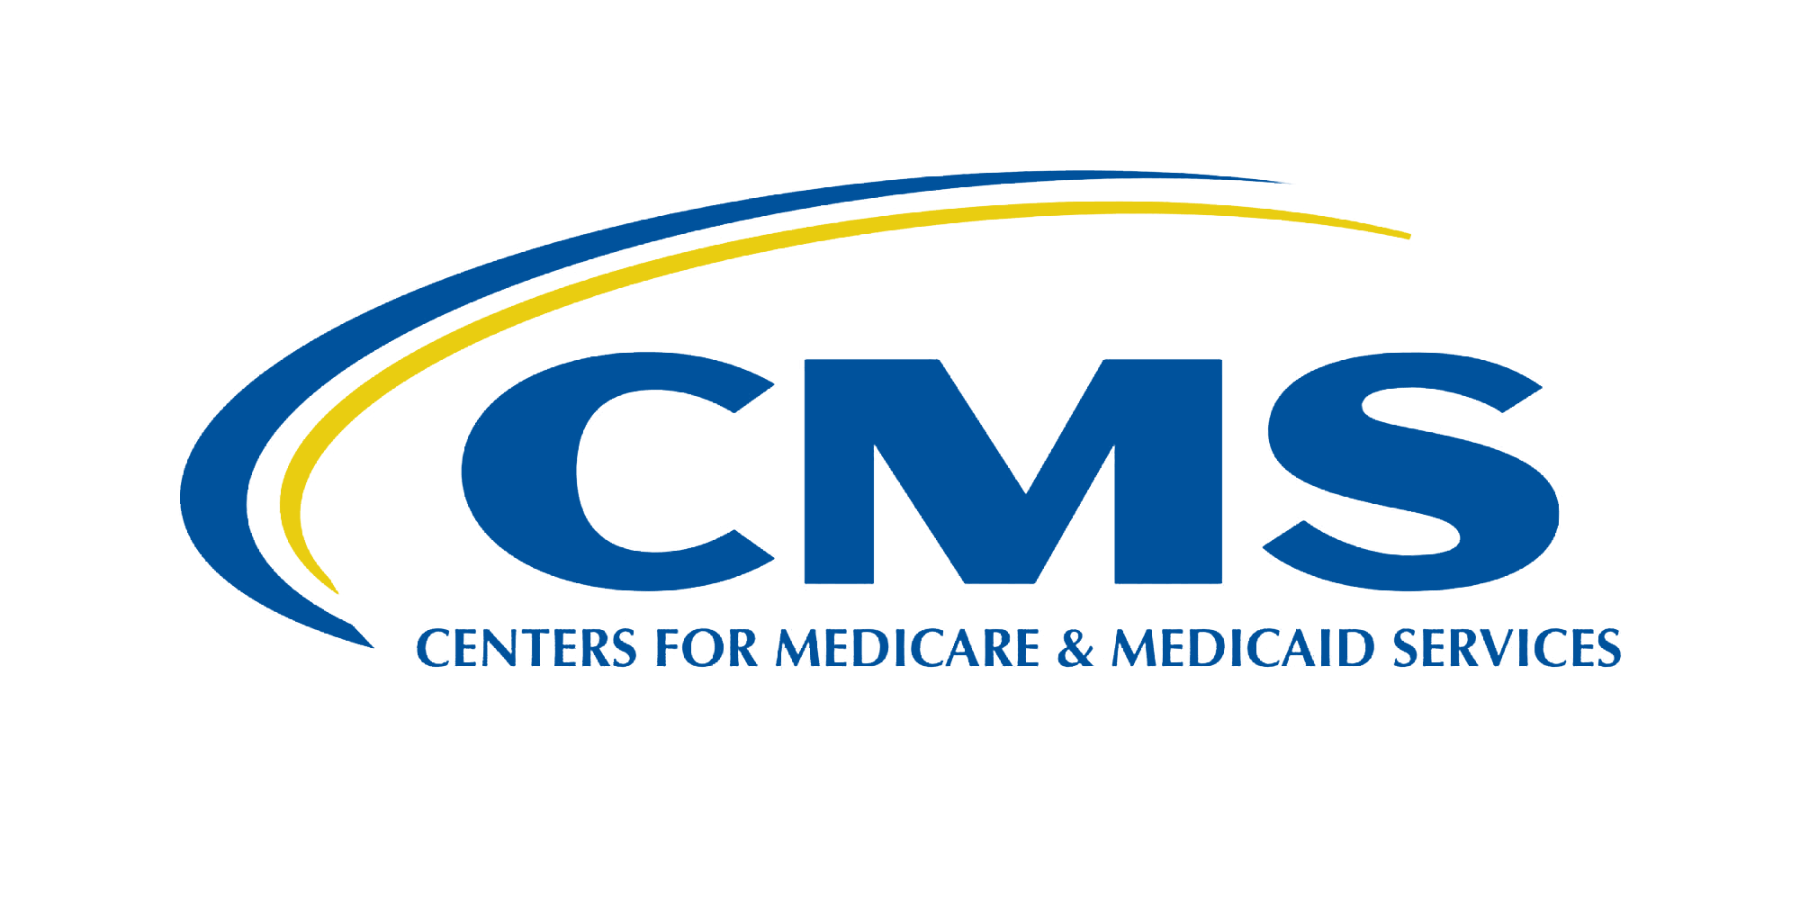 The 2023 Medicare Physician Fee Schedule Proposes Sweeping Changes to